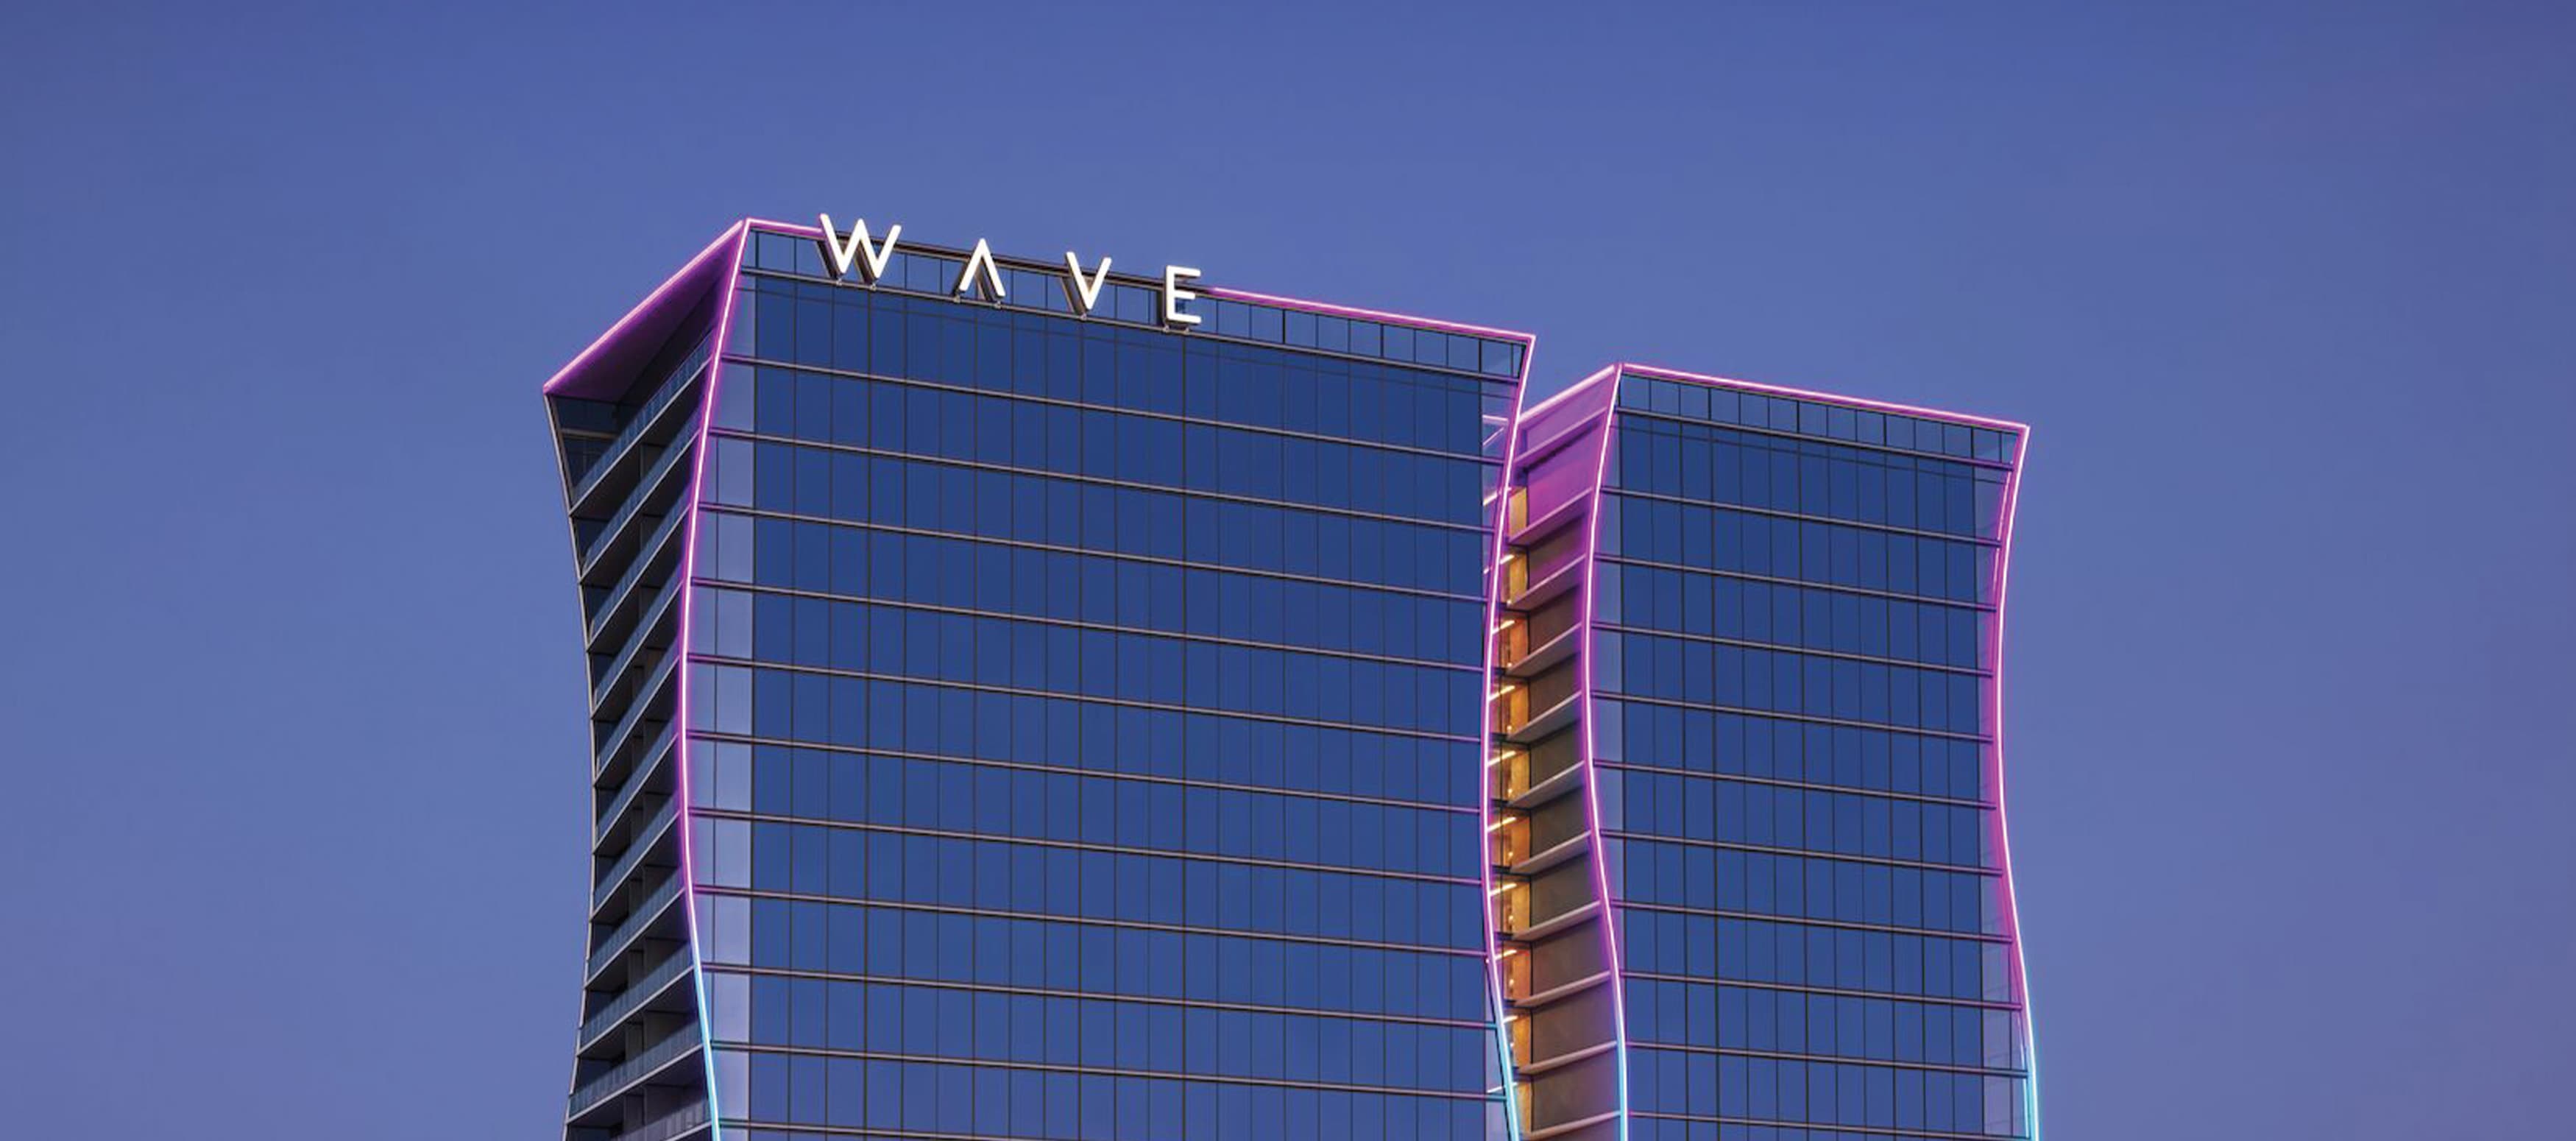 Top angle of the Wave Hotel in Orlando, Florida against a blue sky.